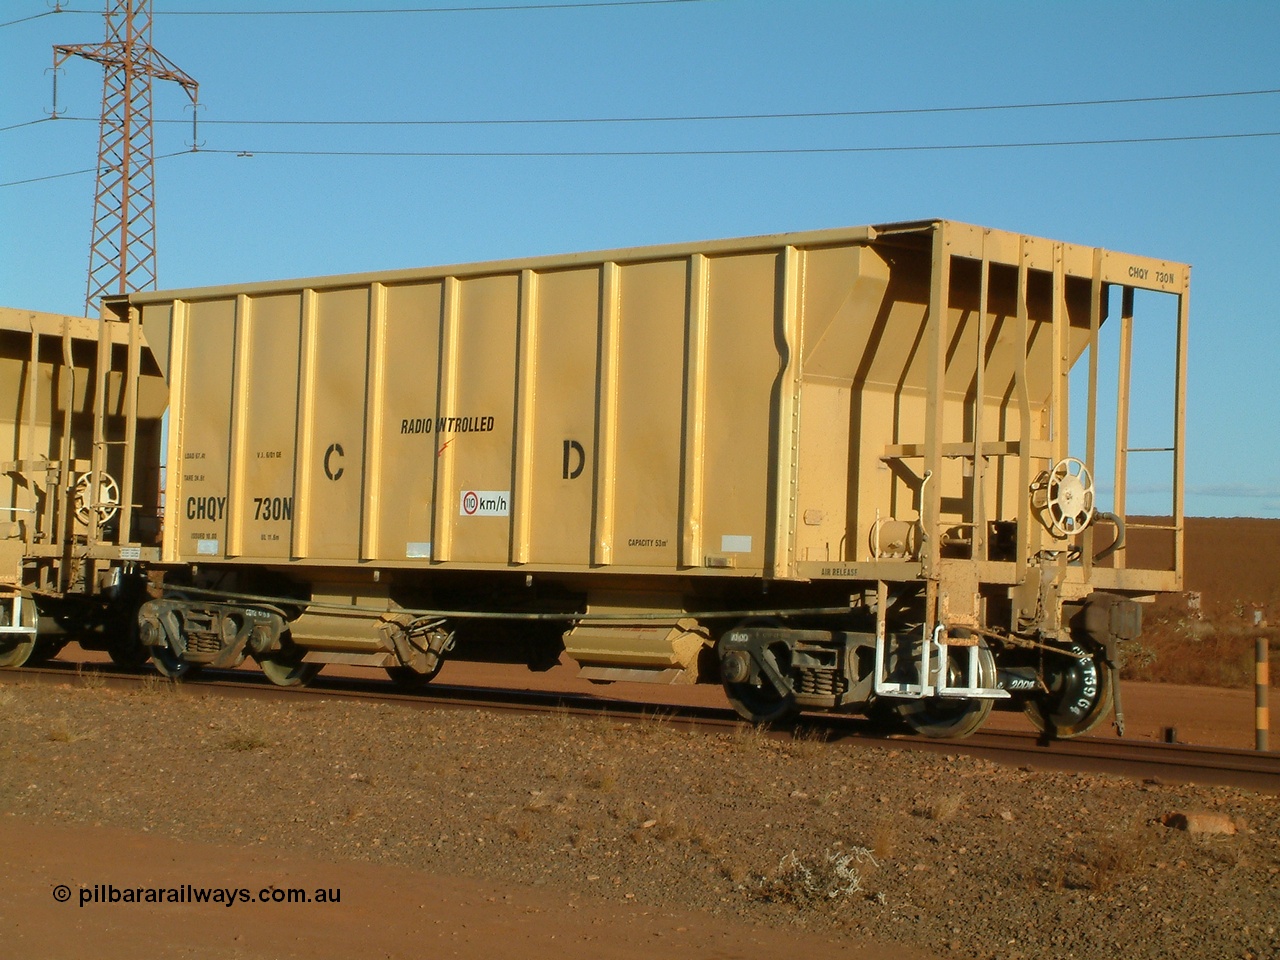 040815 164619
Nelson Point, CFCLA ballast waggon CHQY type 730 just being delivered to BHP Iron Ore as part of the Rail PACE project, 3/4 view from handbrake end.
Keywords: CHQY-type;CHQY730;CFCLA;CRDX-type;BHP-ballast-waggon;